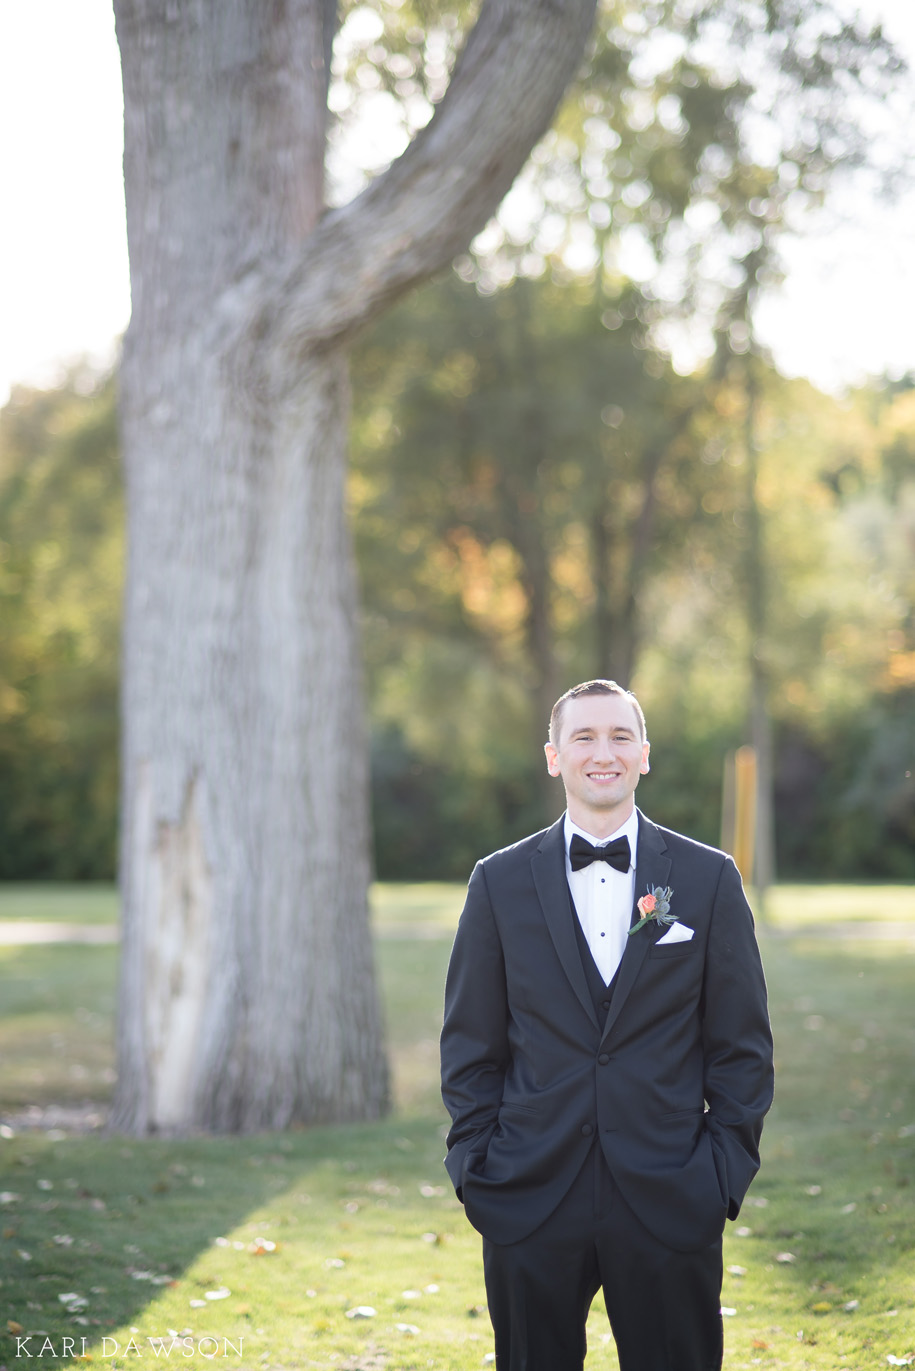 Classic Groom Portrait on his wedding day in his traditional black tuxedo and blow tie . An Autumn Wedding Chapel Wedding in Michigan